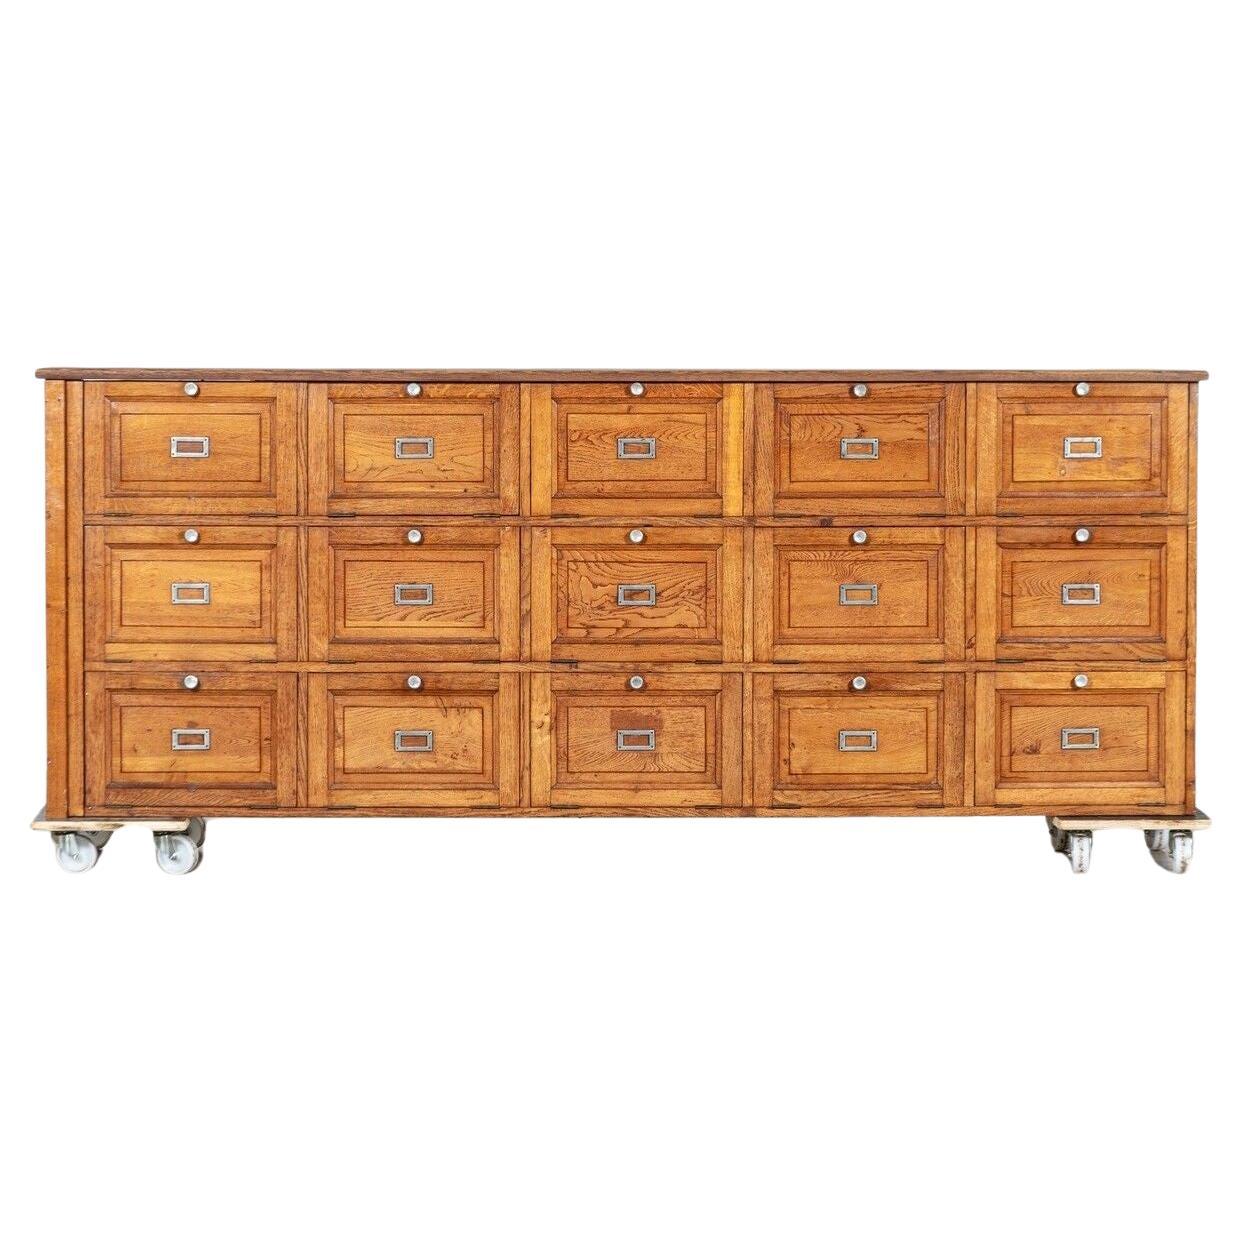 Large French Oak Haberdashery Drawers / Cabinet / Console For Sale